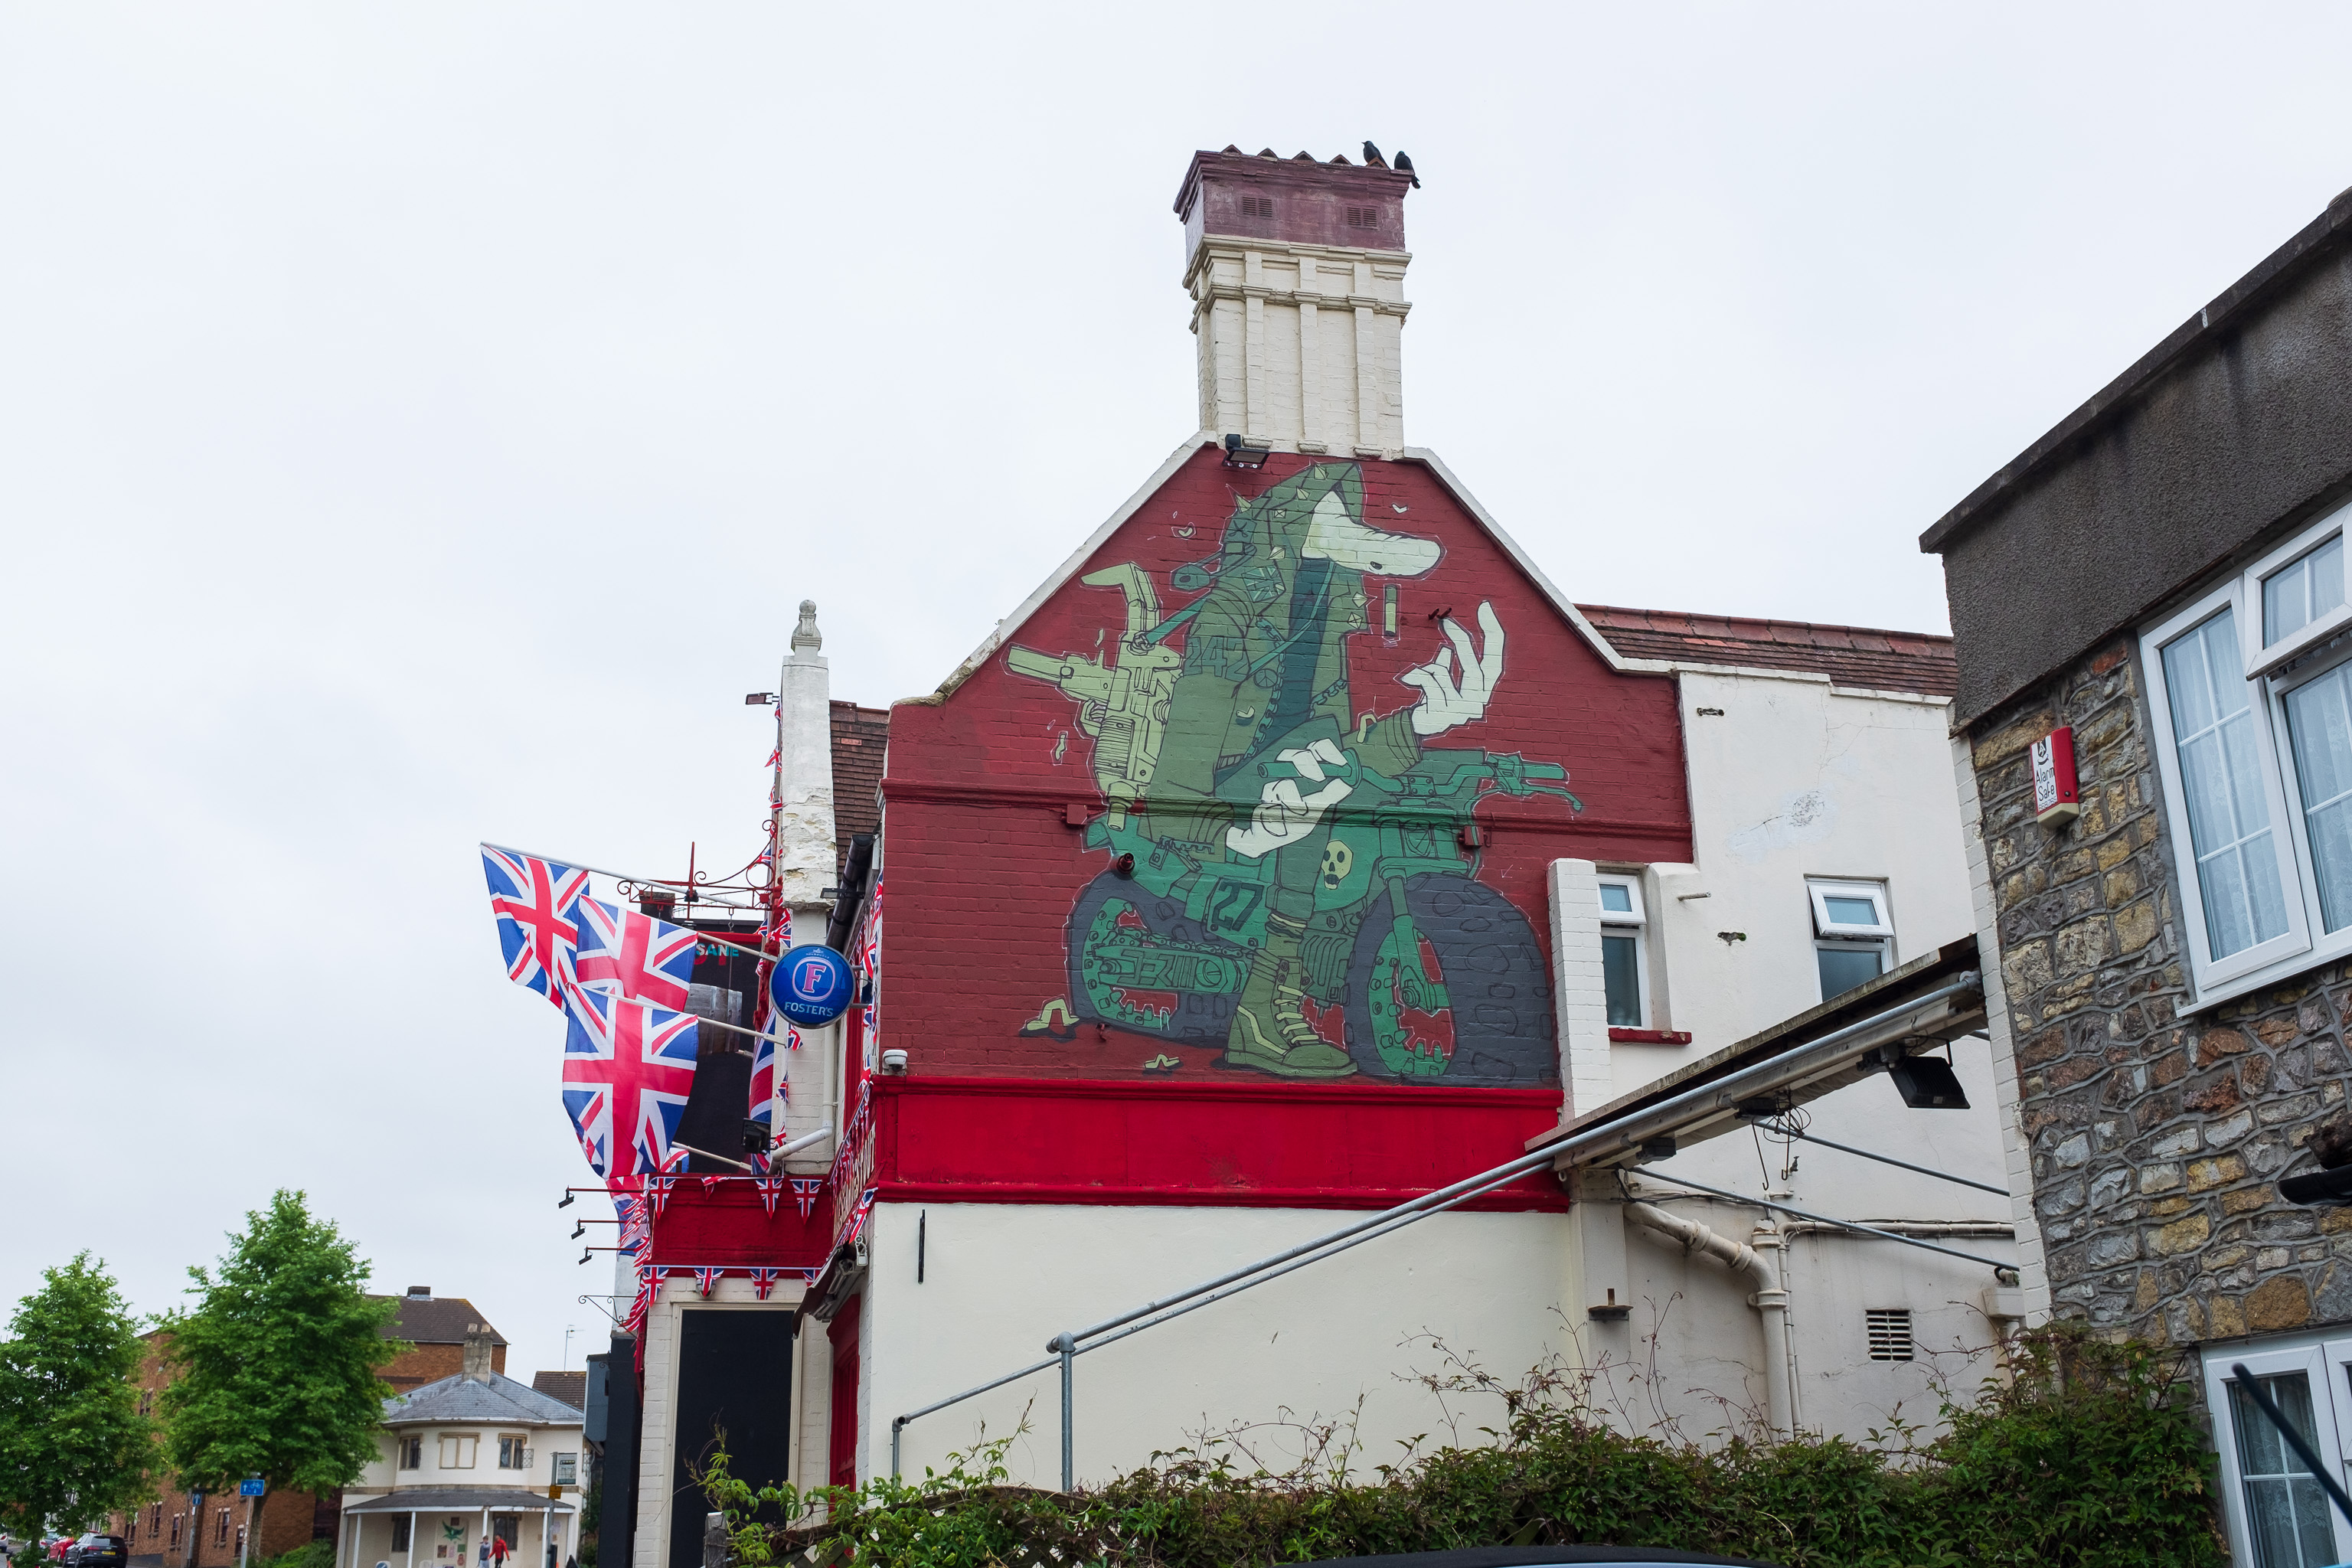 Coopers Arms
Pre-Upfest, as recently as April, Pikto's boy with the catapult still adorned the side of the Coopers Arms.

Not quite sure what to make of the rep...